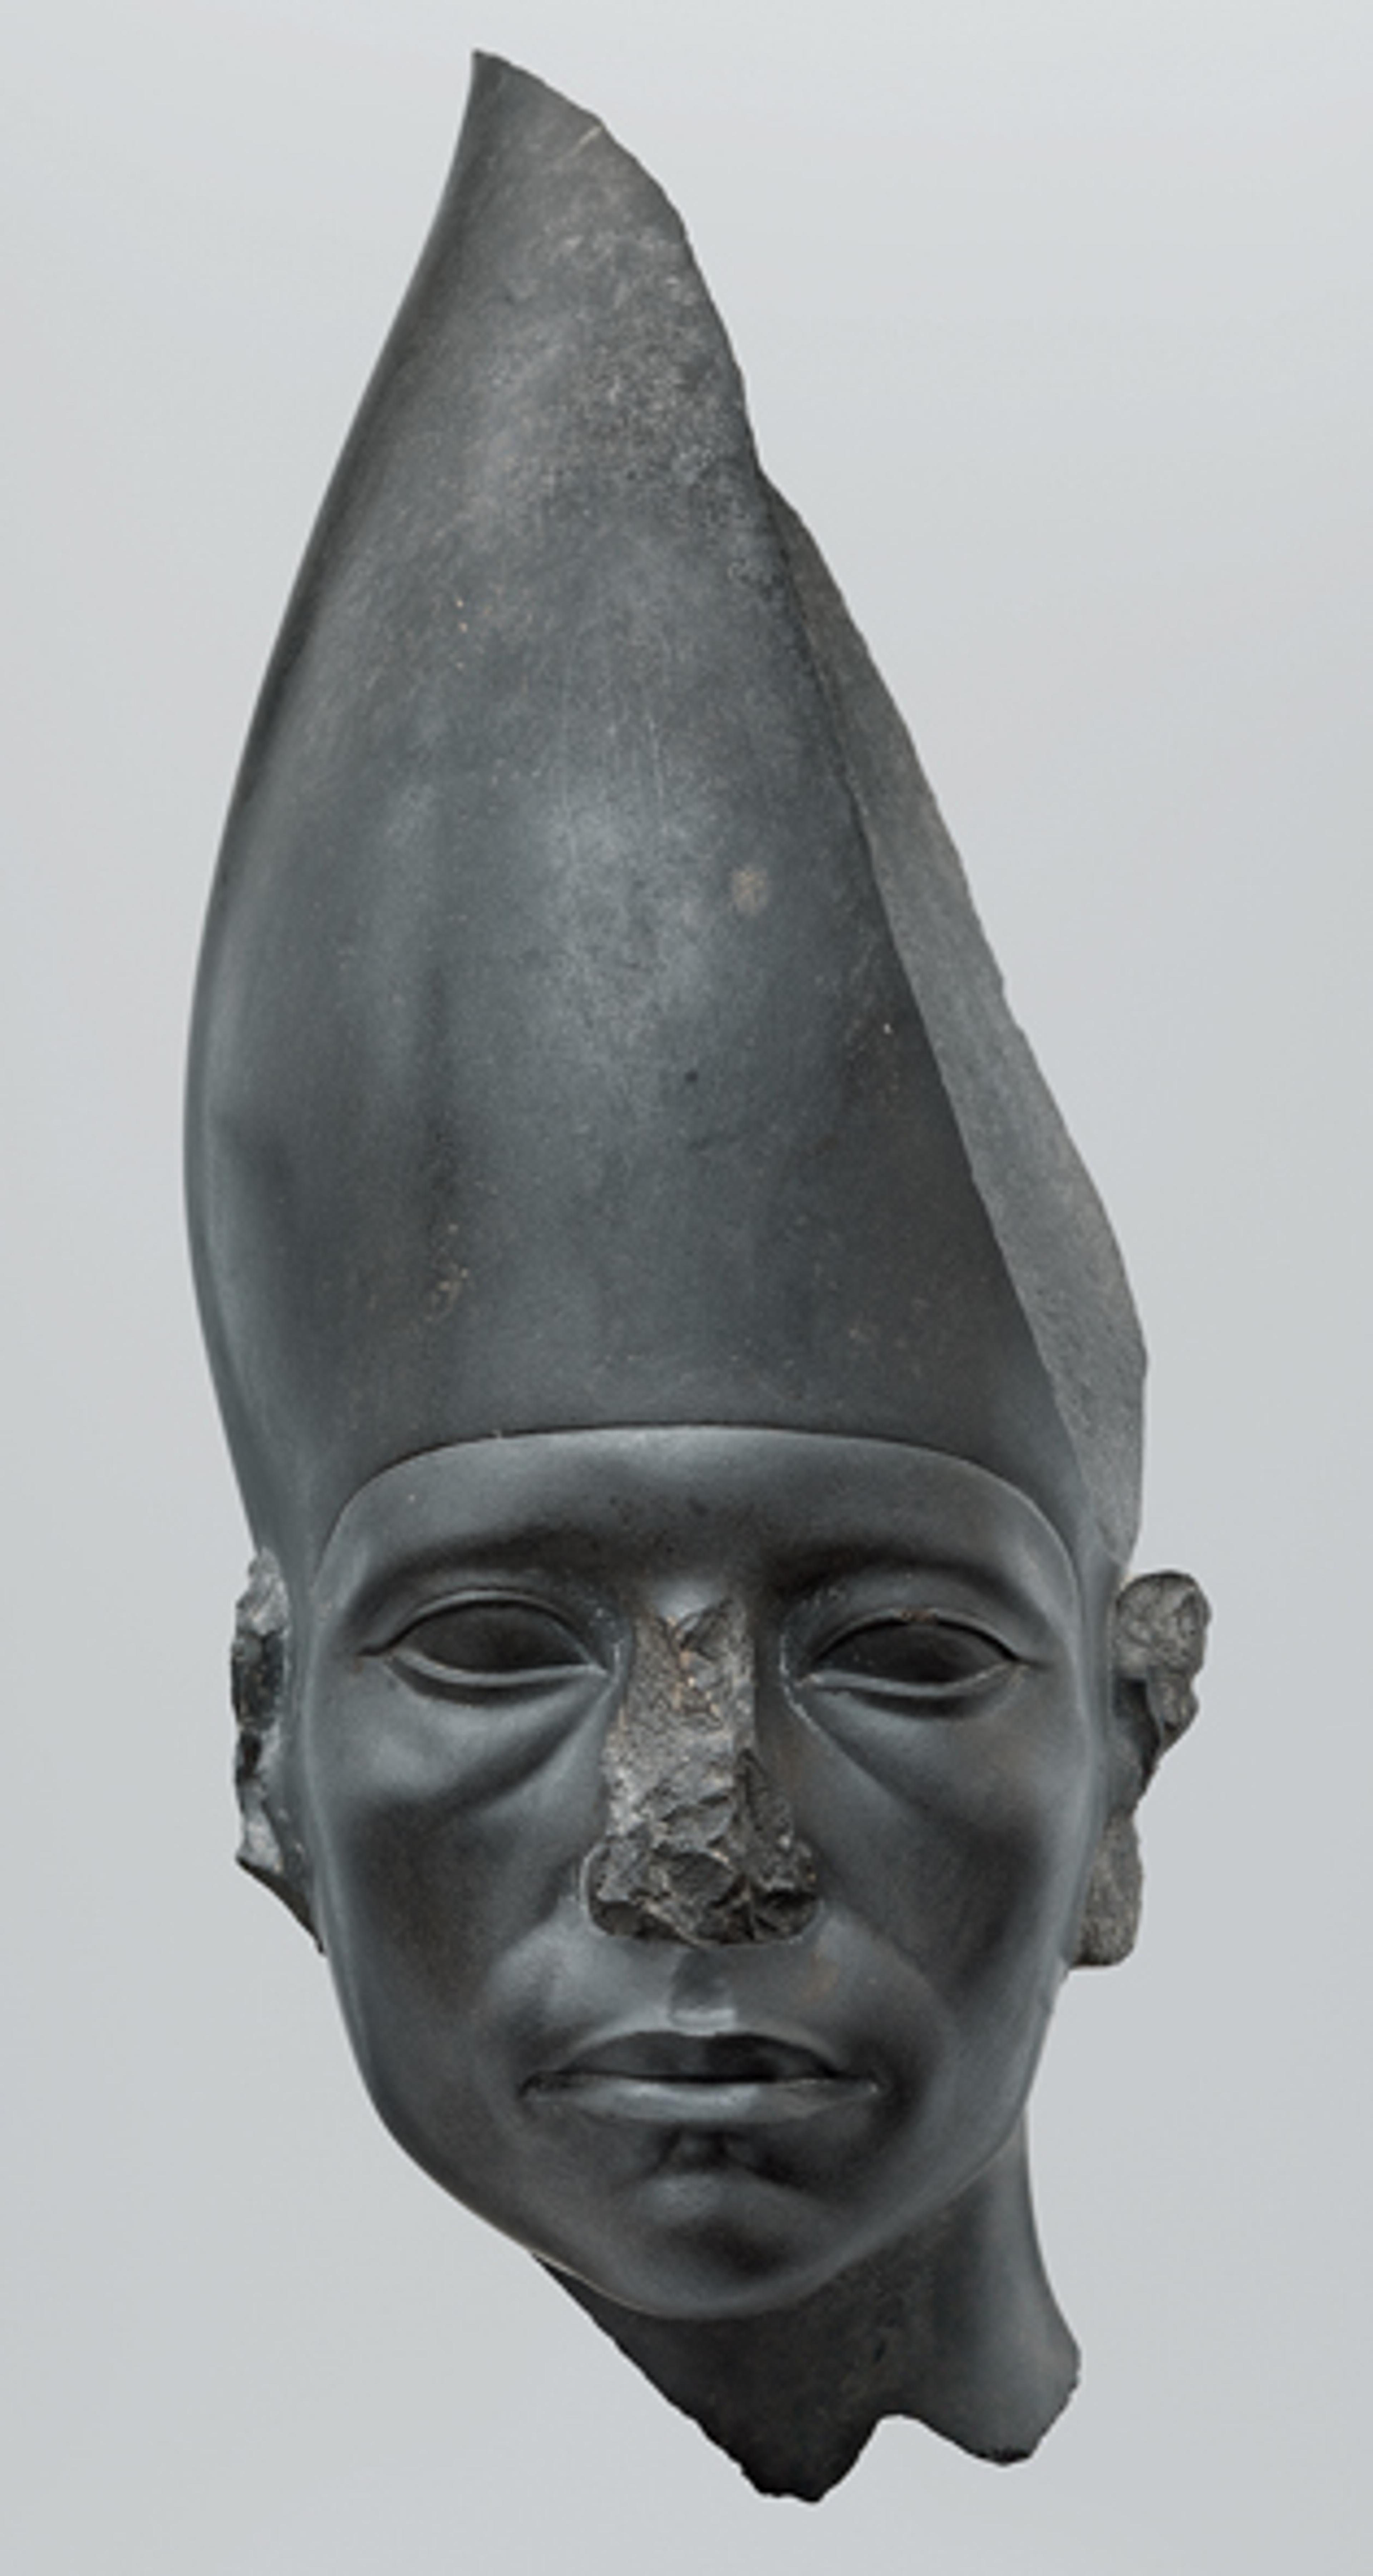  Head of a Statue of Amenemhat III Wearing the White Crown